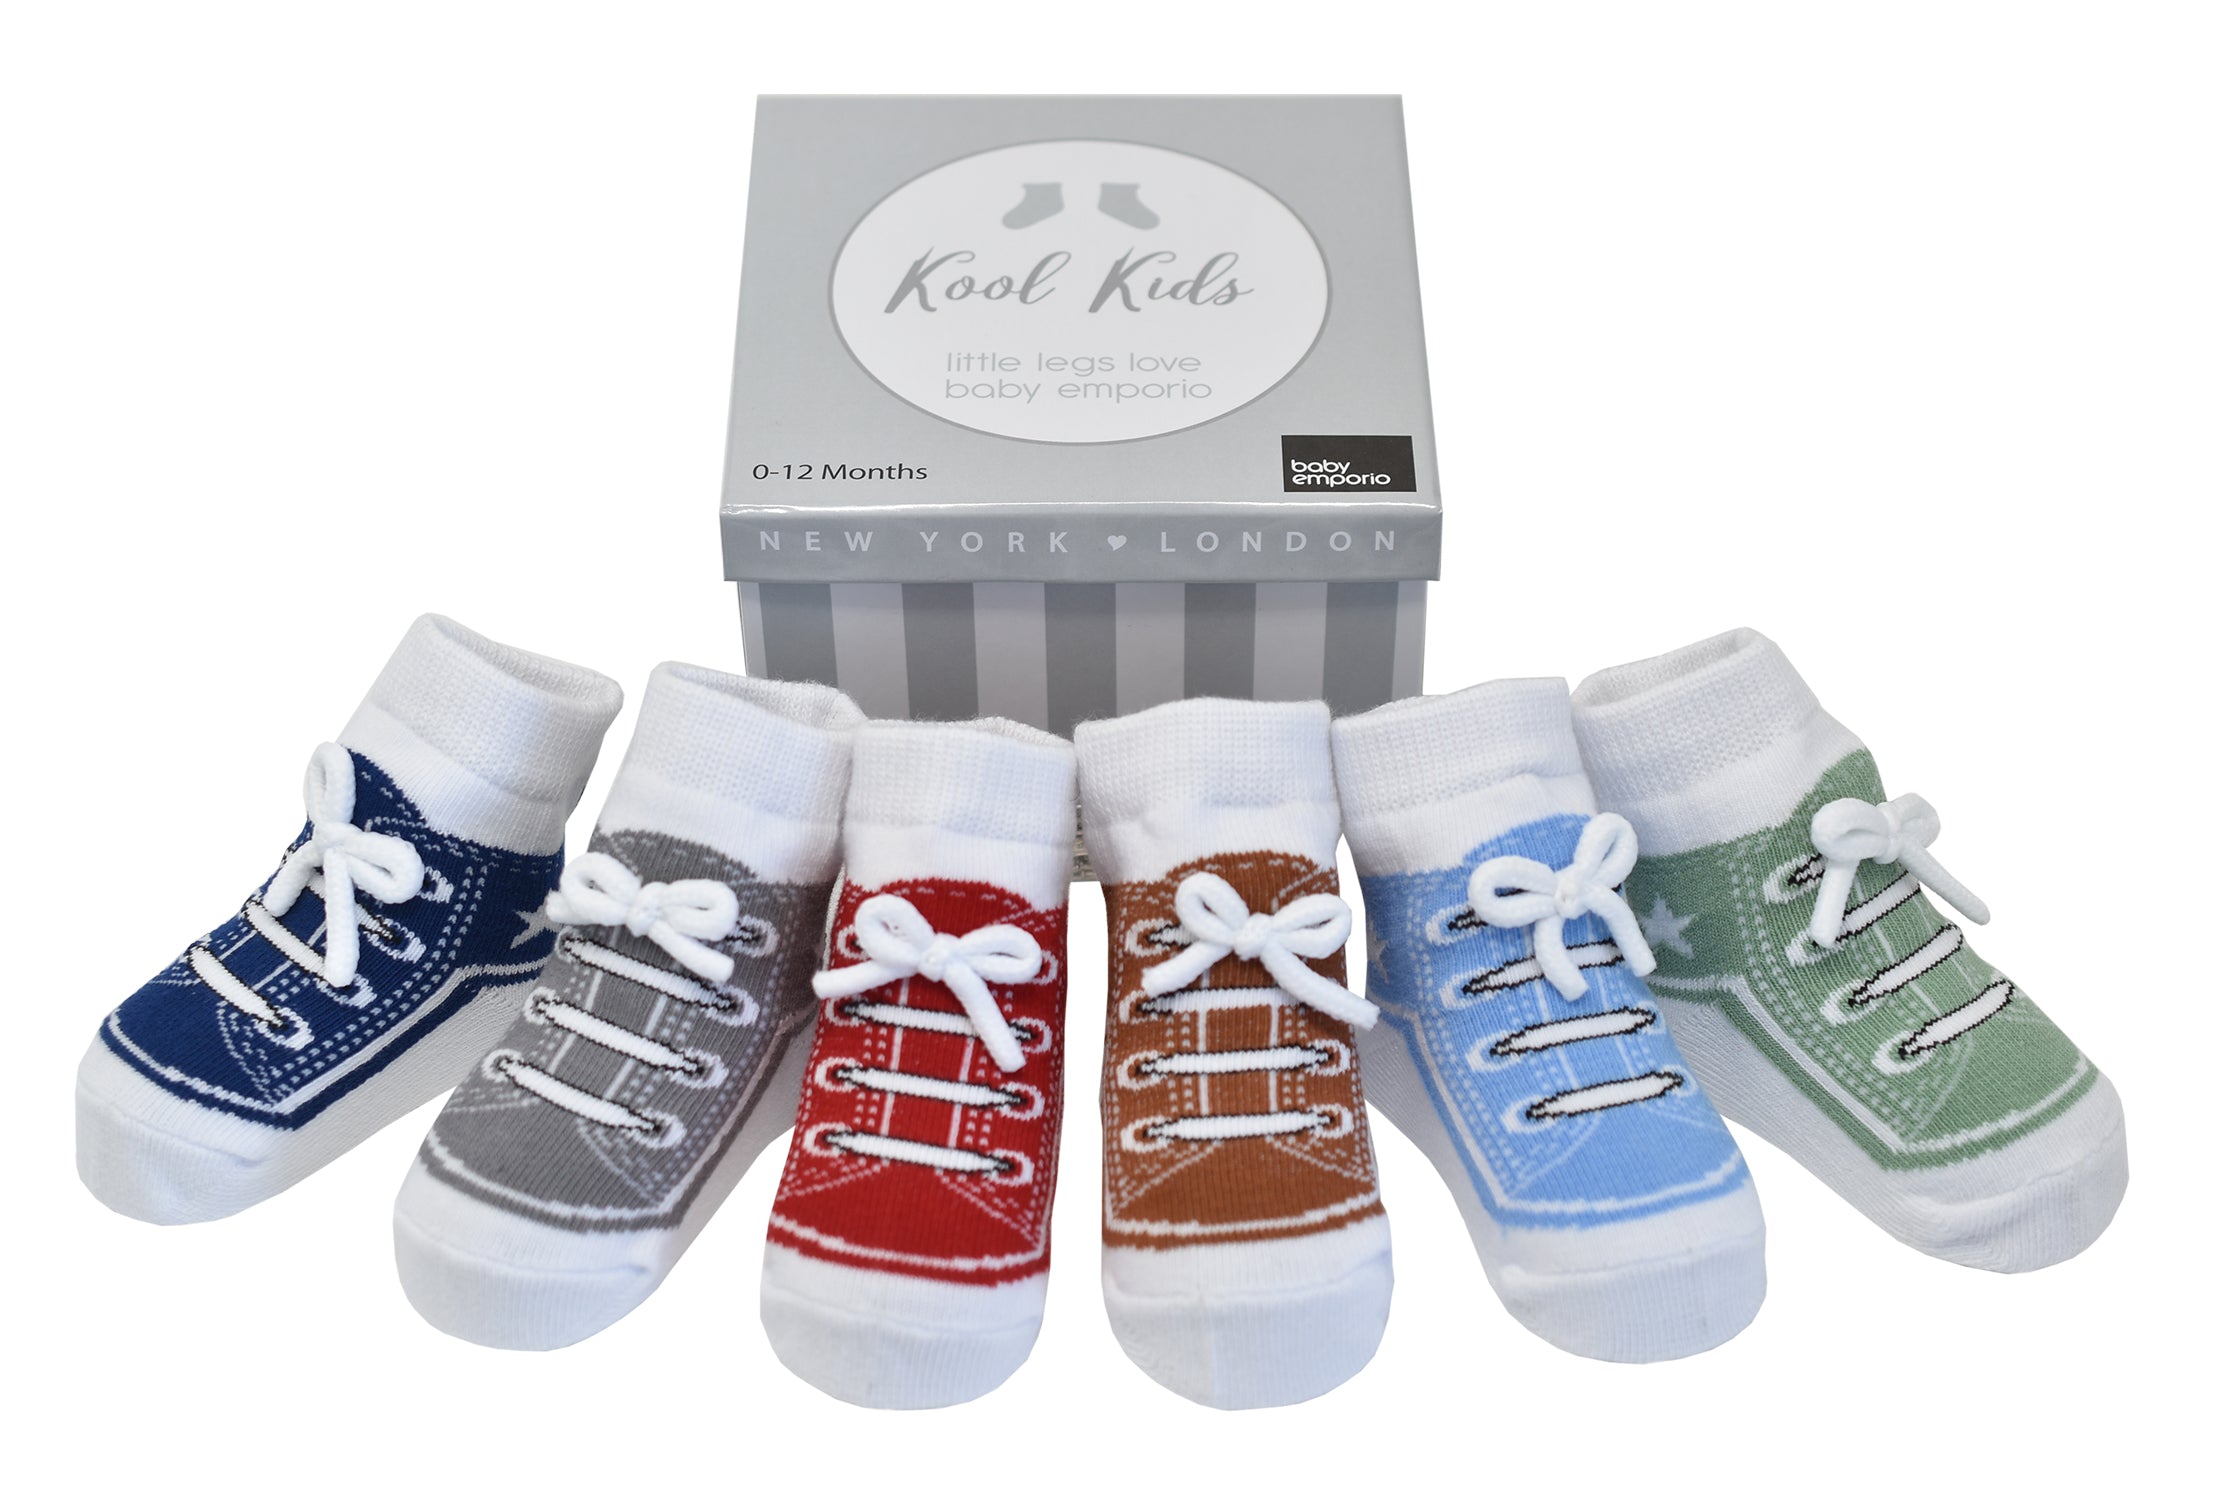 Baby boy socks with faux shoe laces 6 pair in gift box for baby shower or baby gift